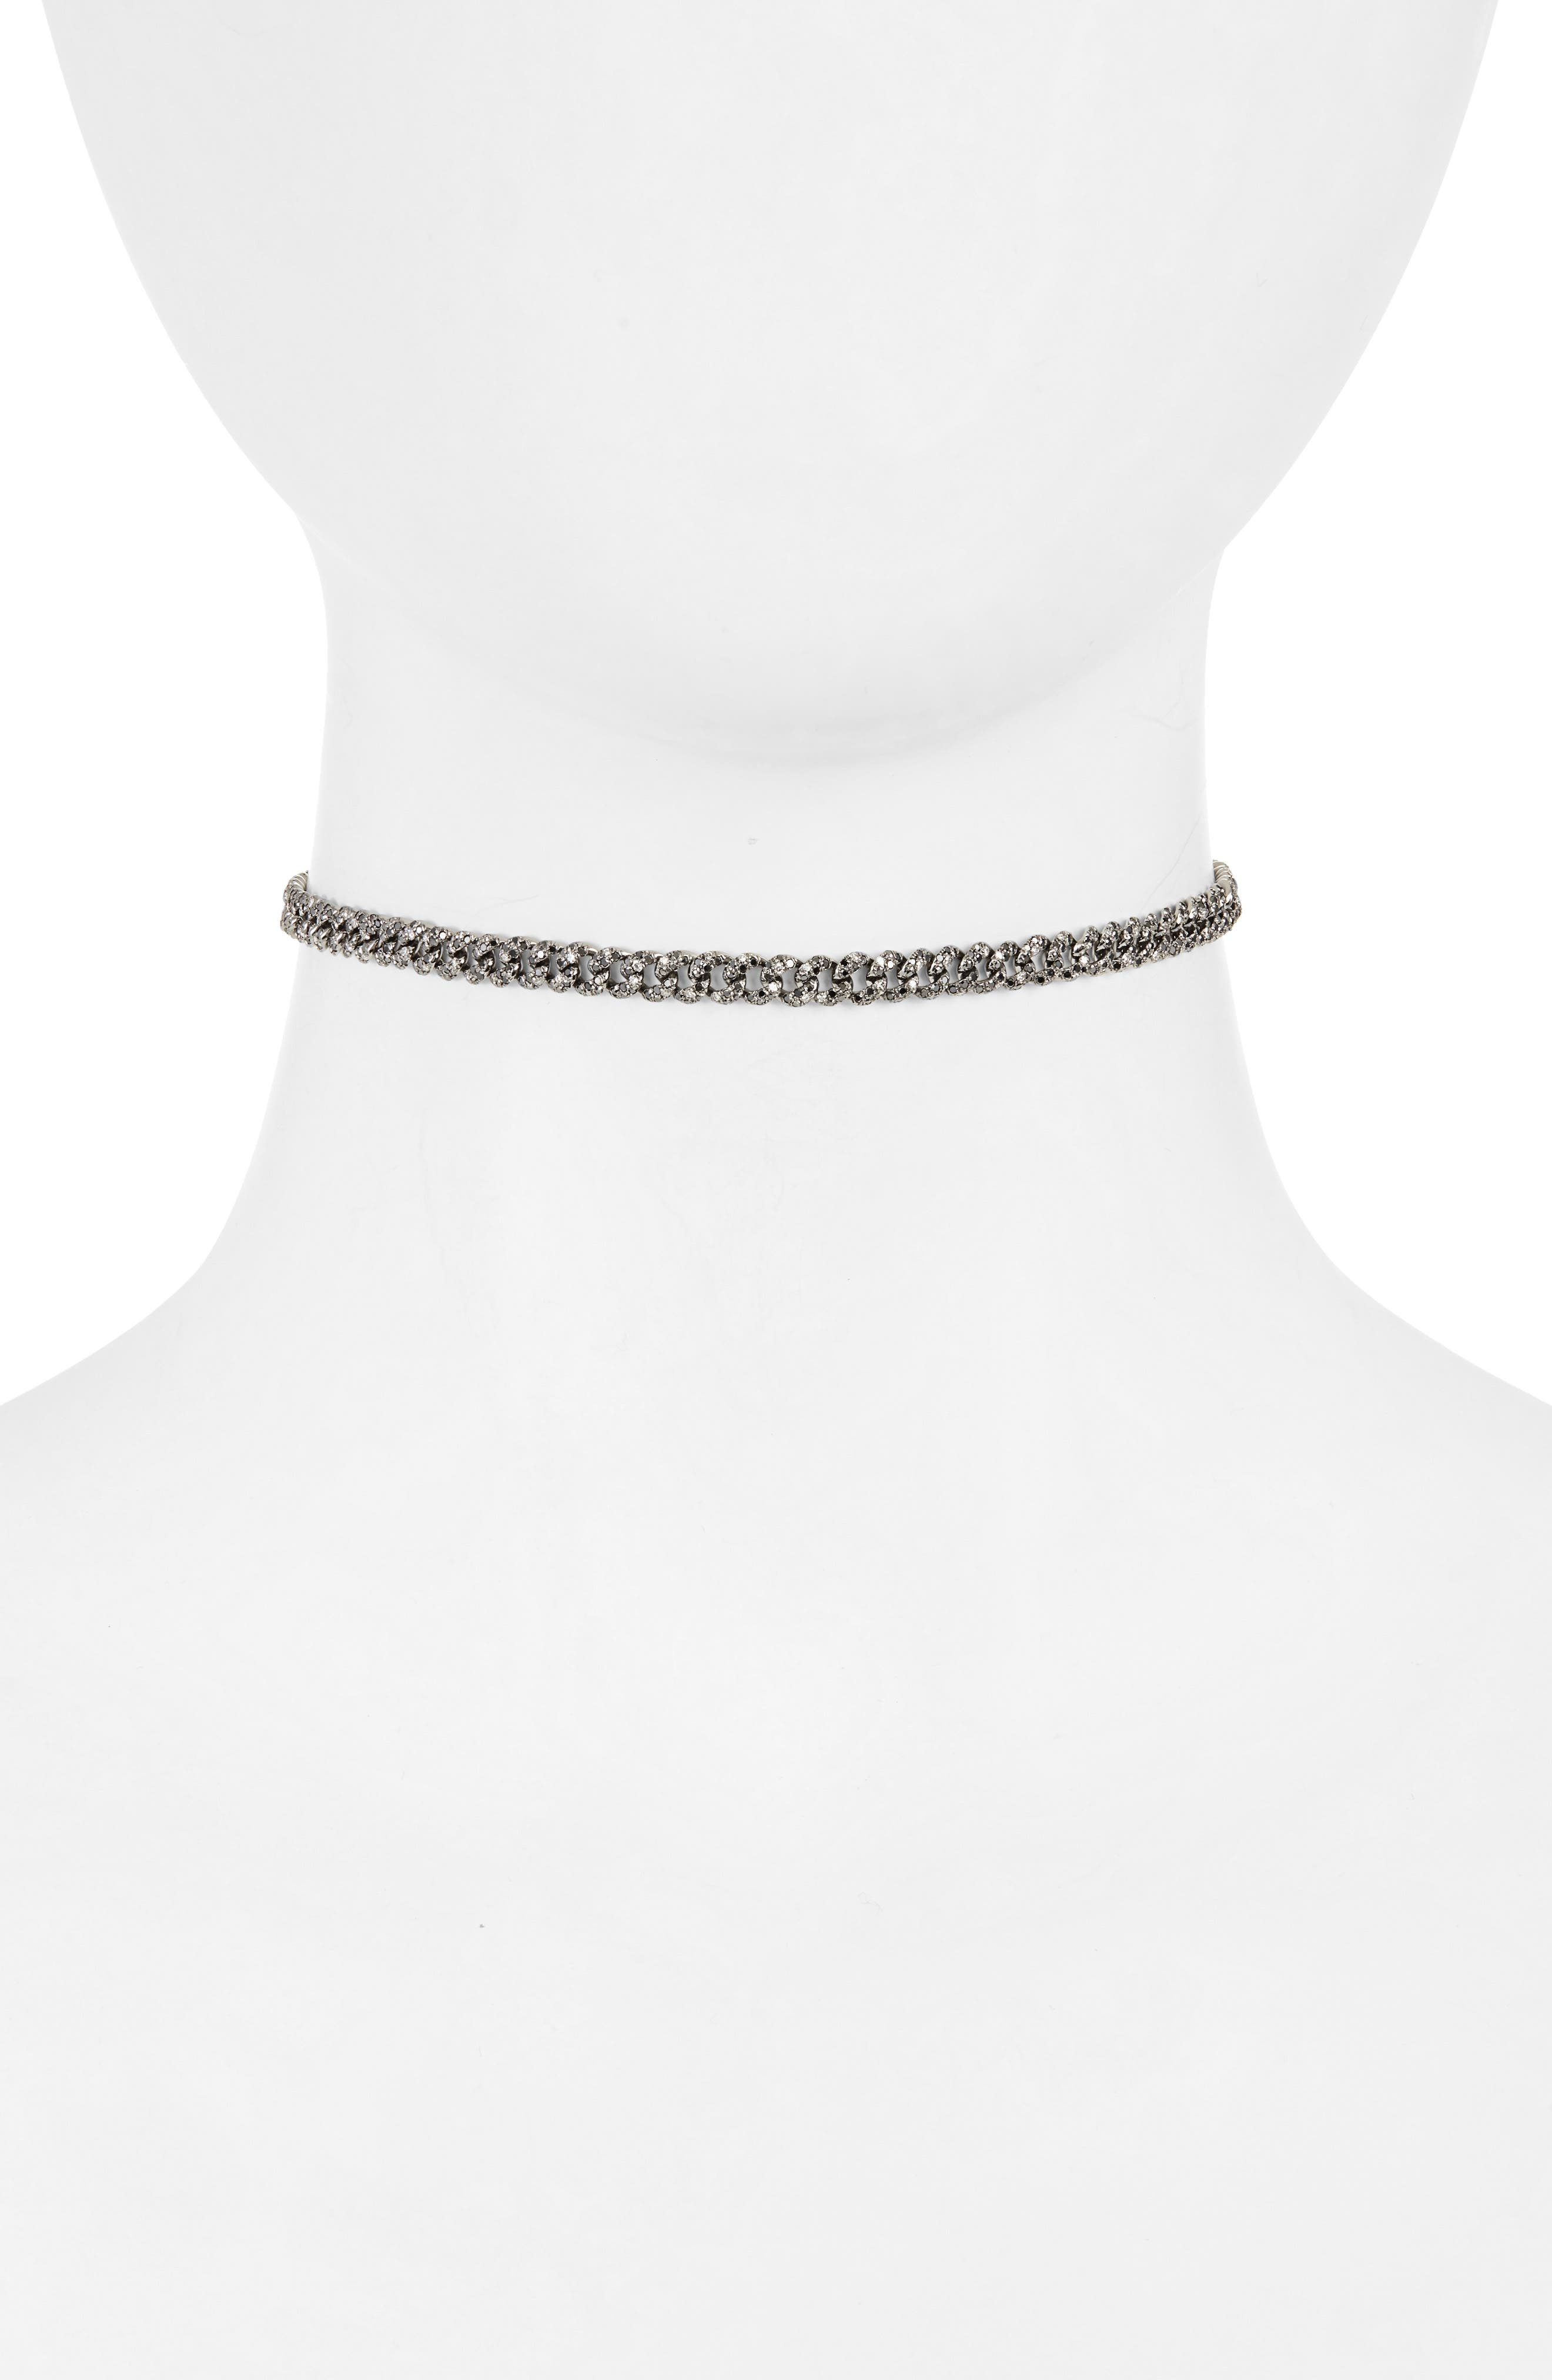 SHAY Twinkle Mini Pave Diamond Link Choker in Yellow Gold at Nordstrom